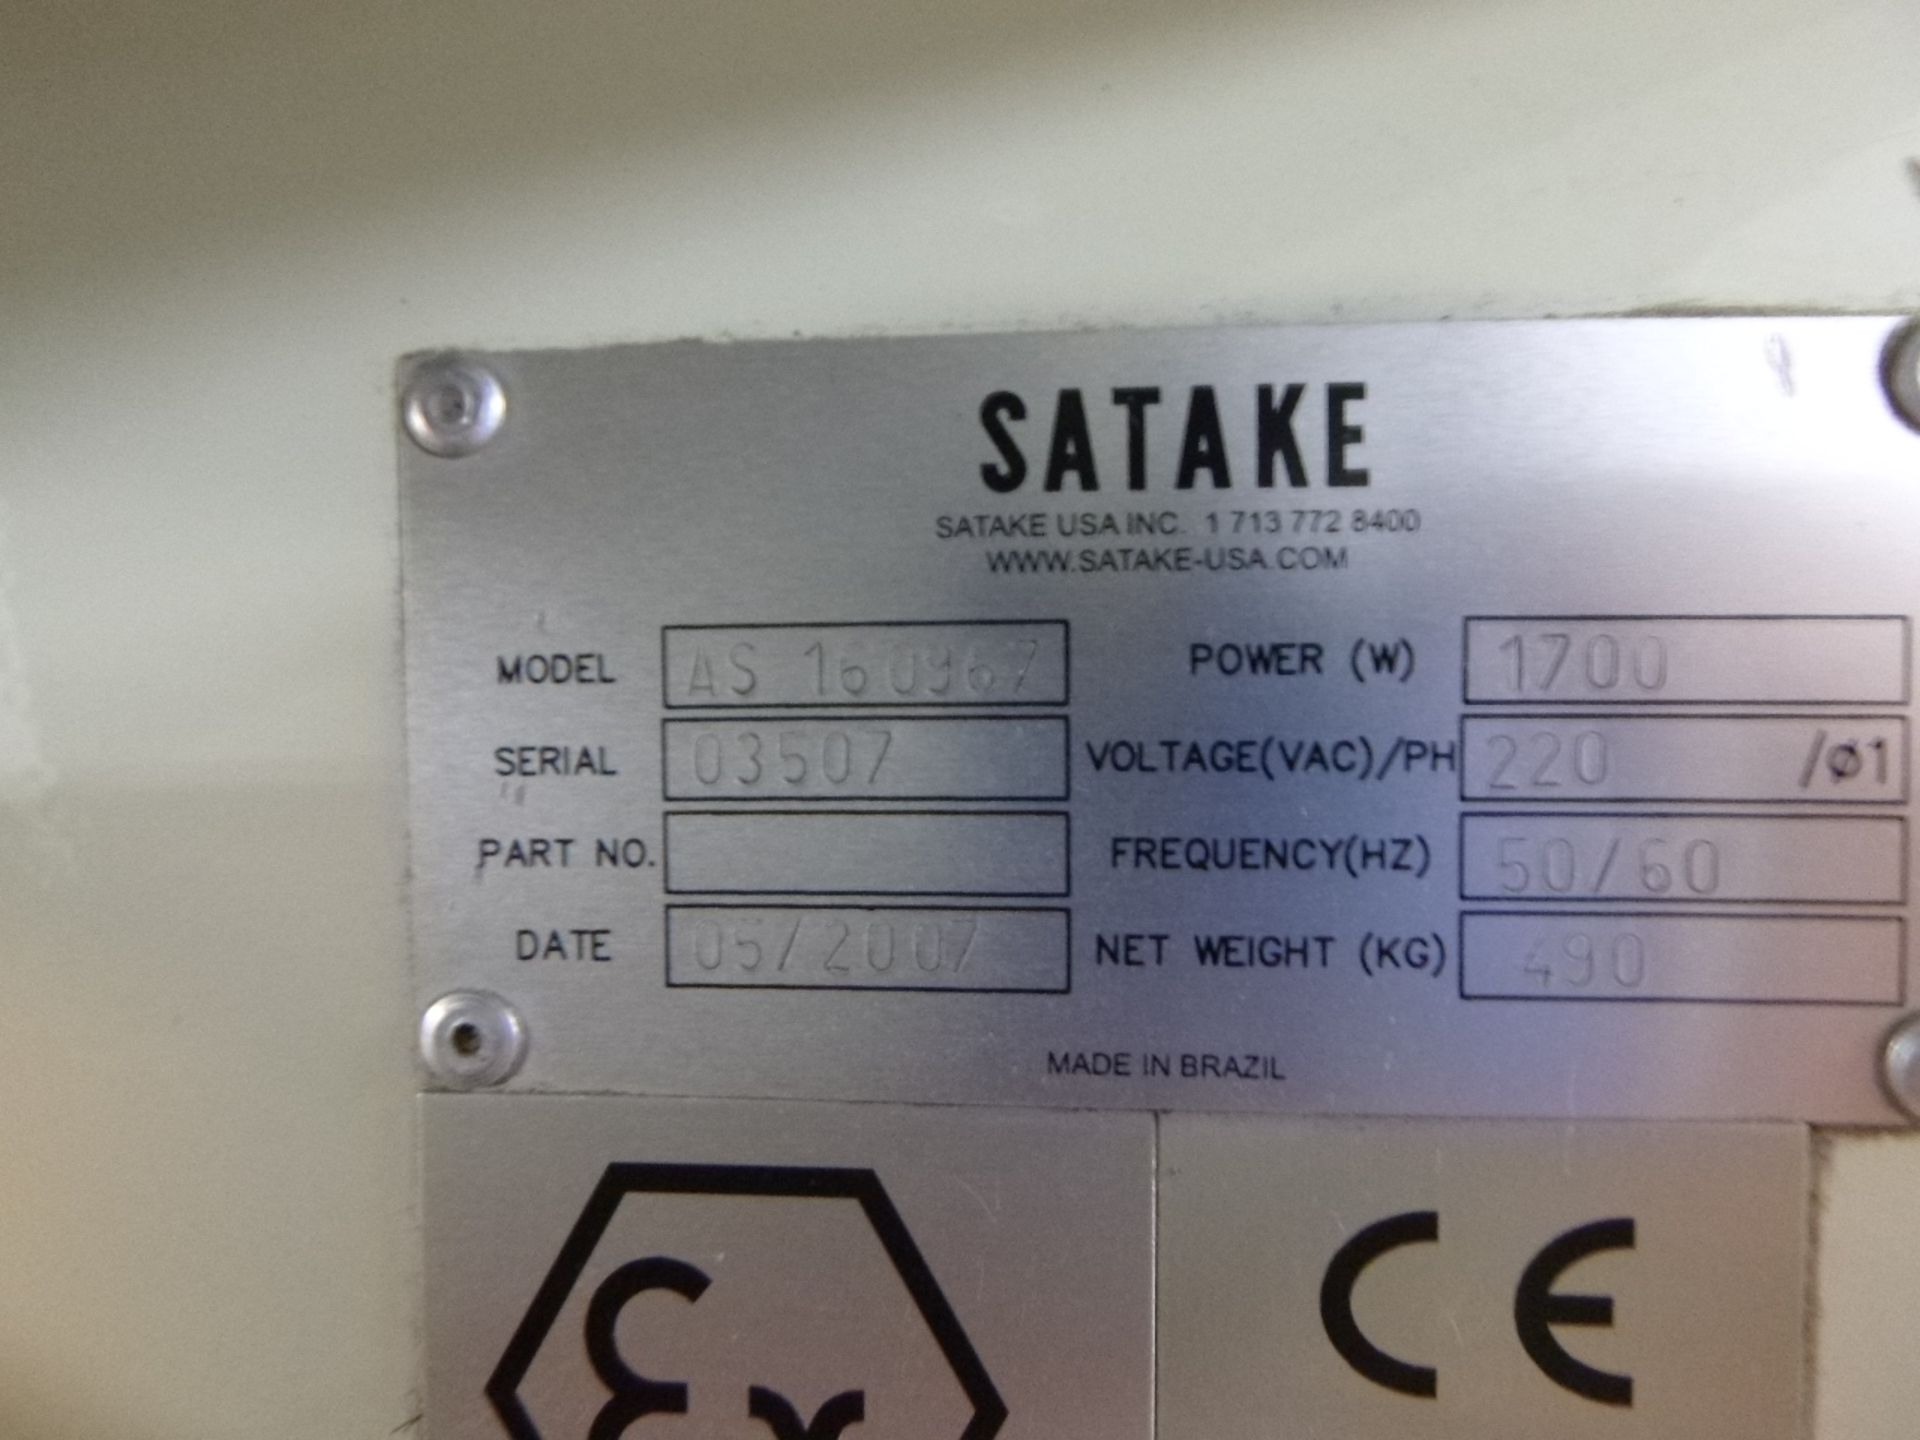 Satake AS 160967 Alpha Scan Colour Sorter, year of manufacture 2007, 1700 watts, 220V (vendors - Image 7 of 11